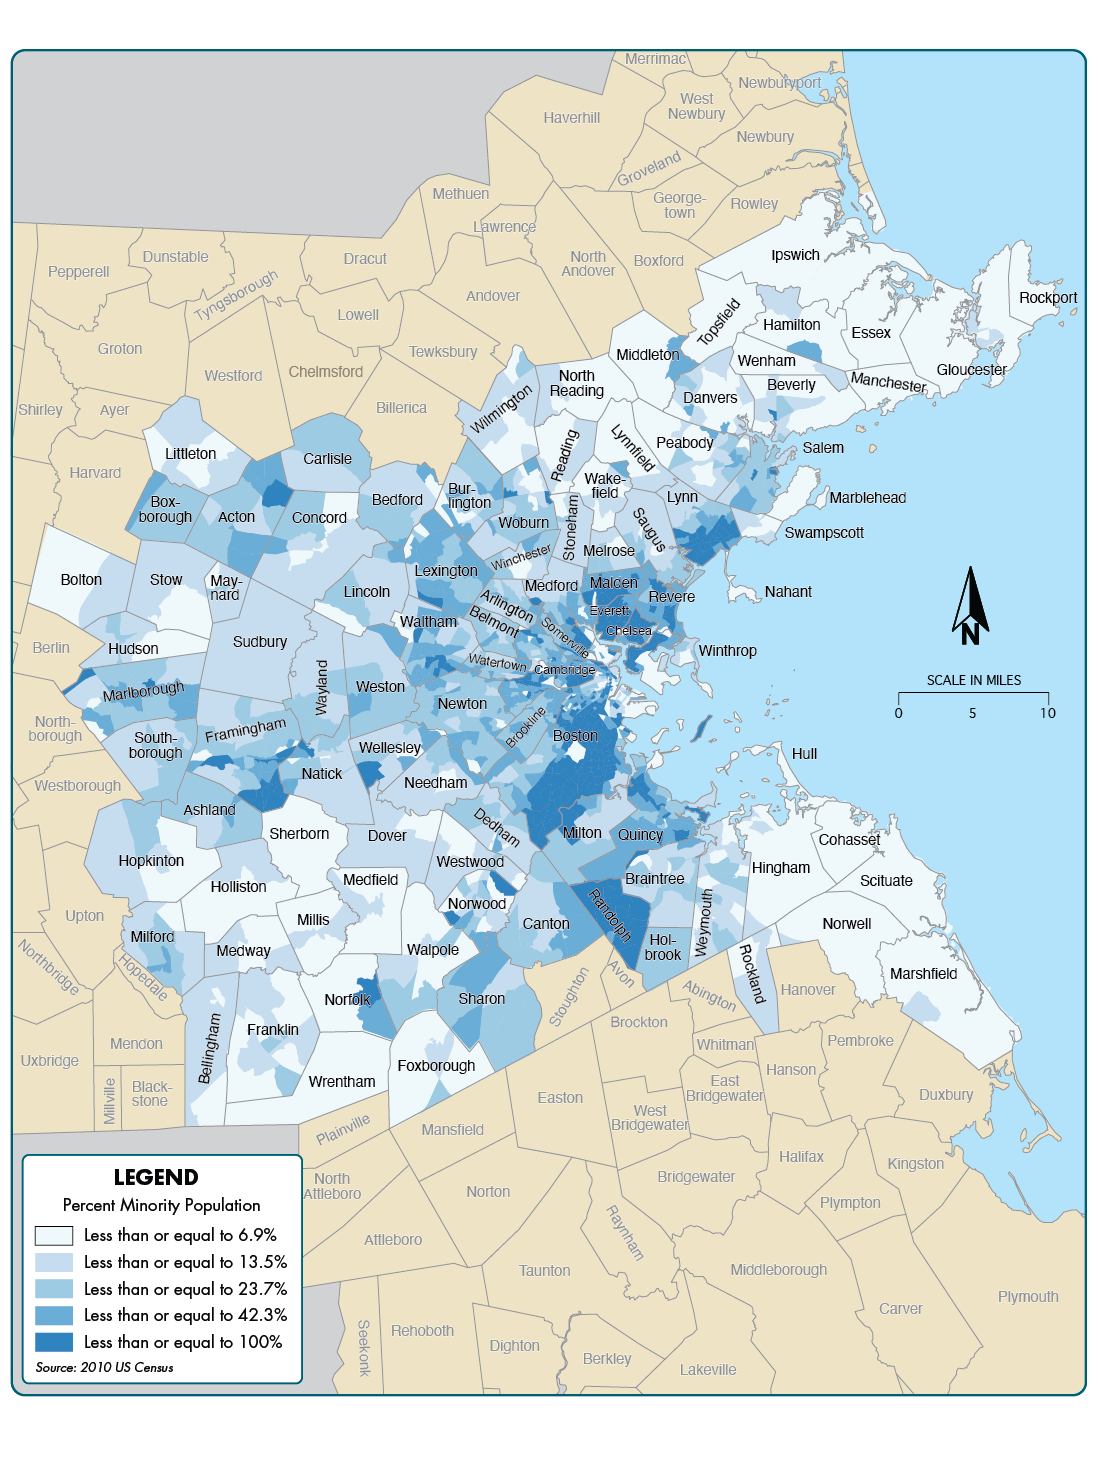 Figure 6-1 is a map showing the percent of the population that identifies as a minority across the 97 communities in the Boston region.